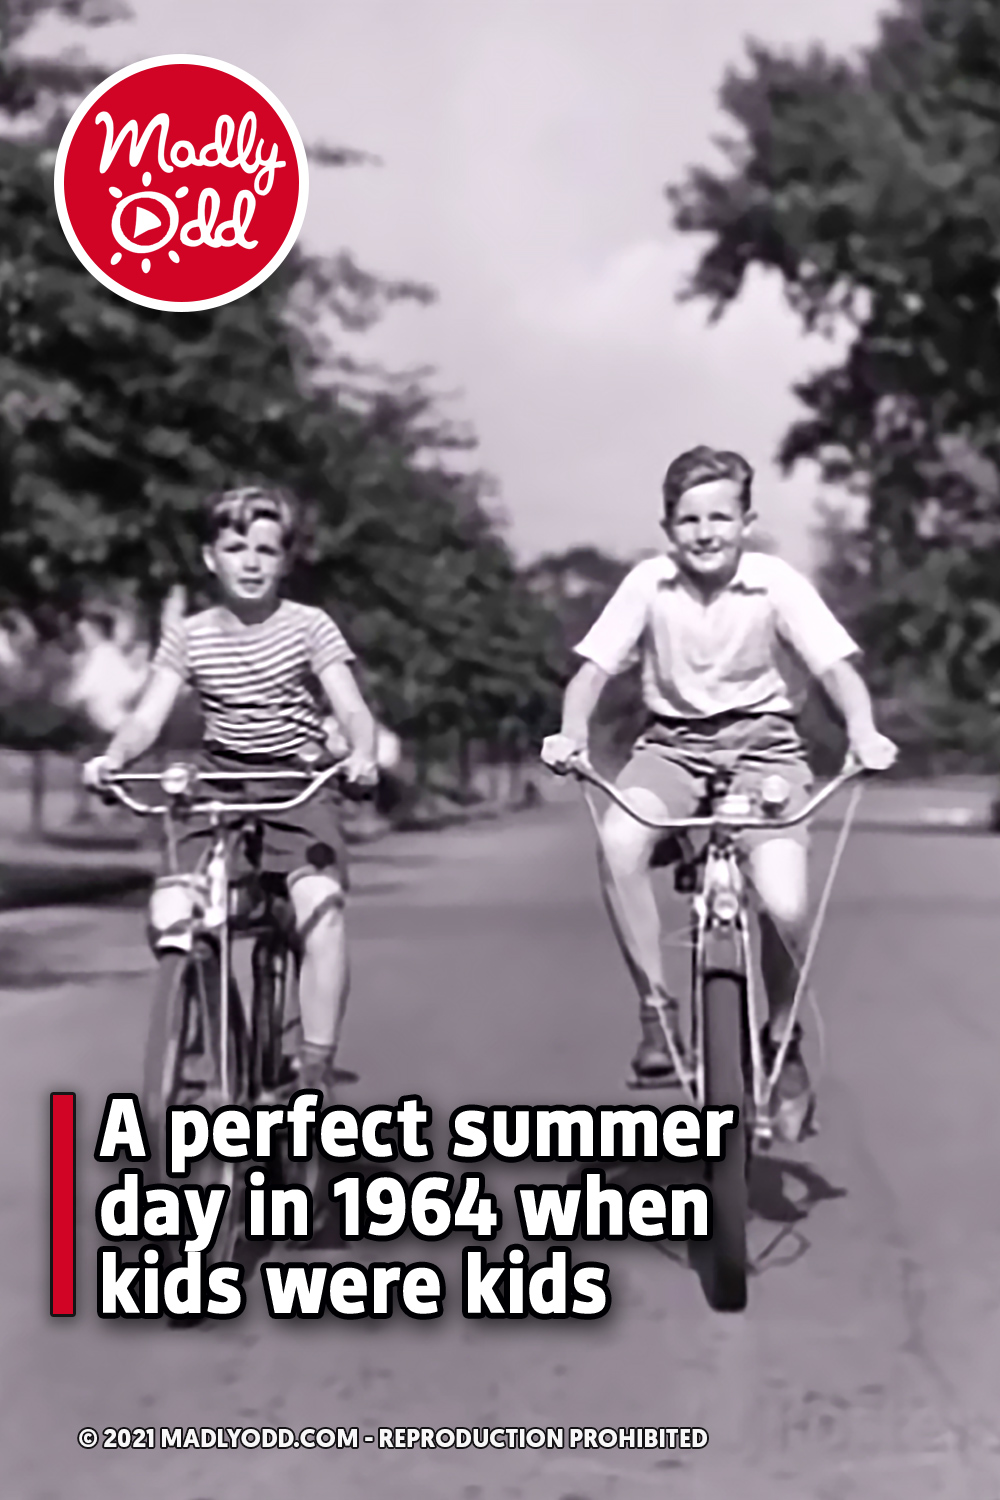 A perfect summer day in 1964 when kids were kids